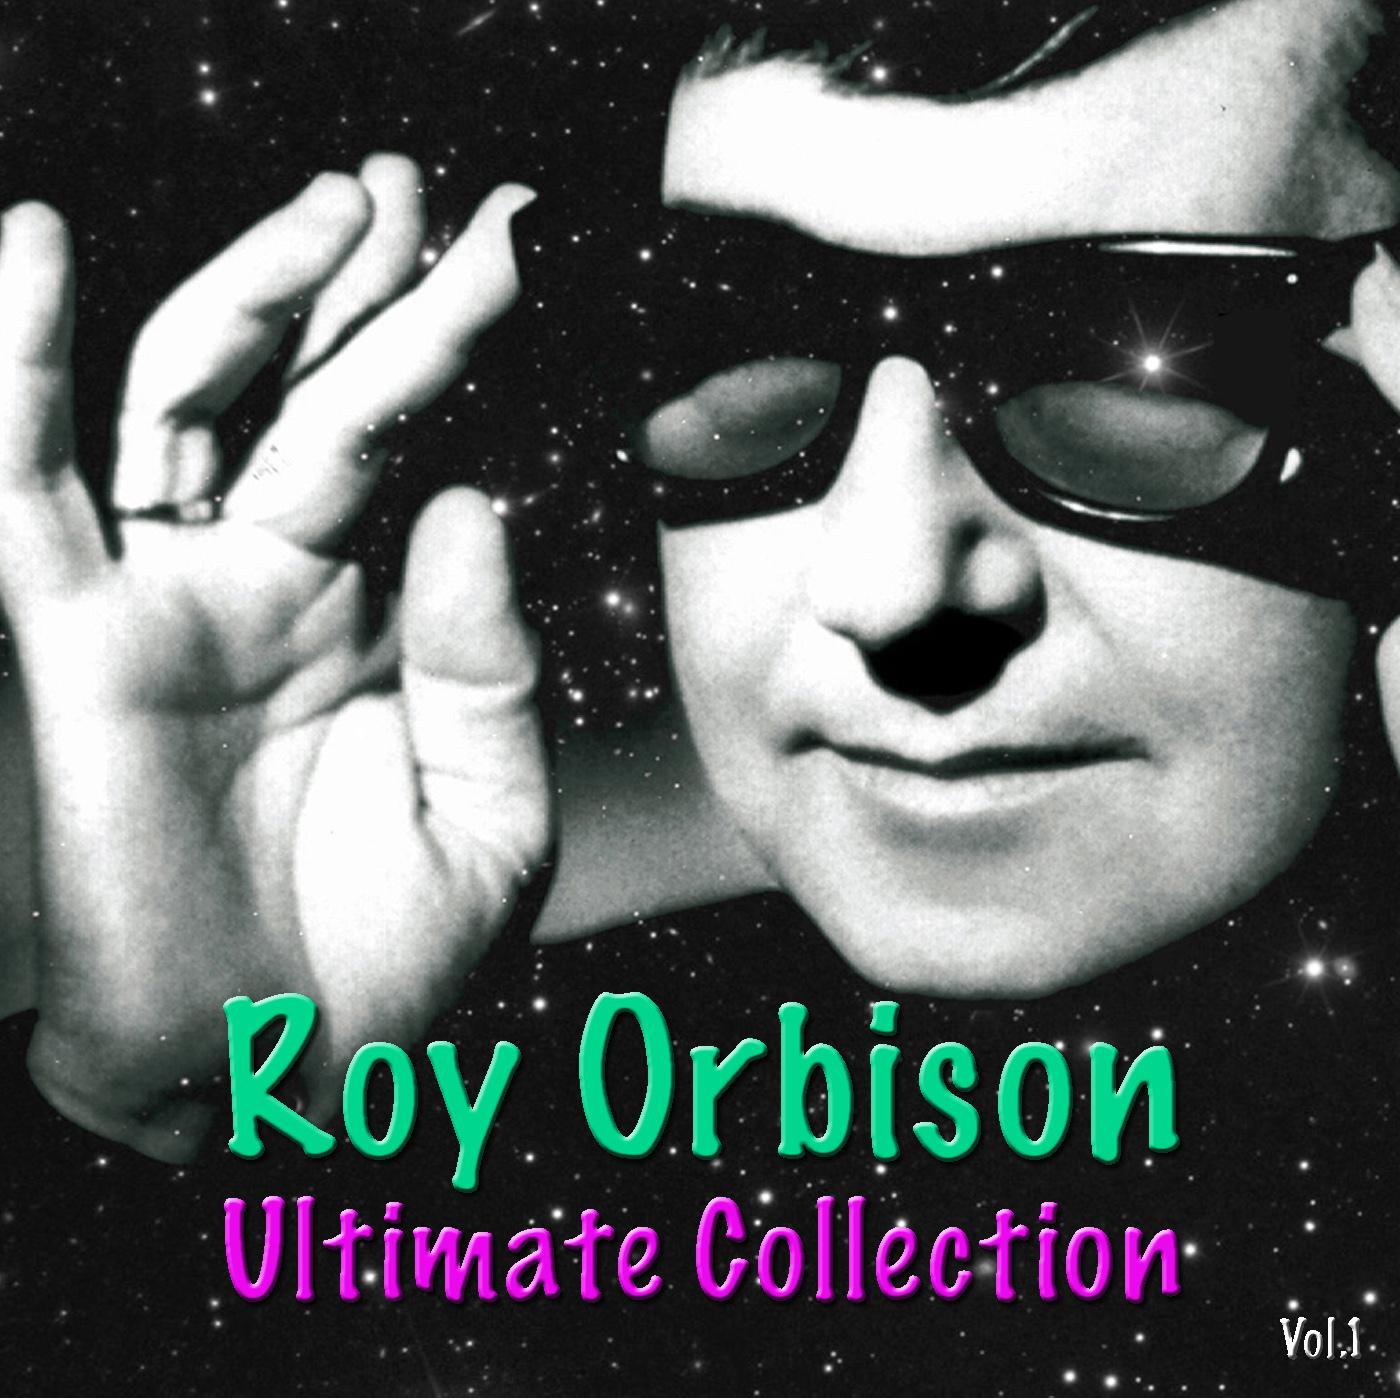 Roy Orbison, Ultimate Collection Vol. 1